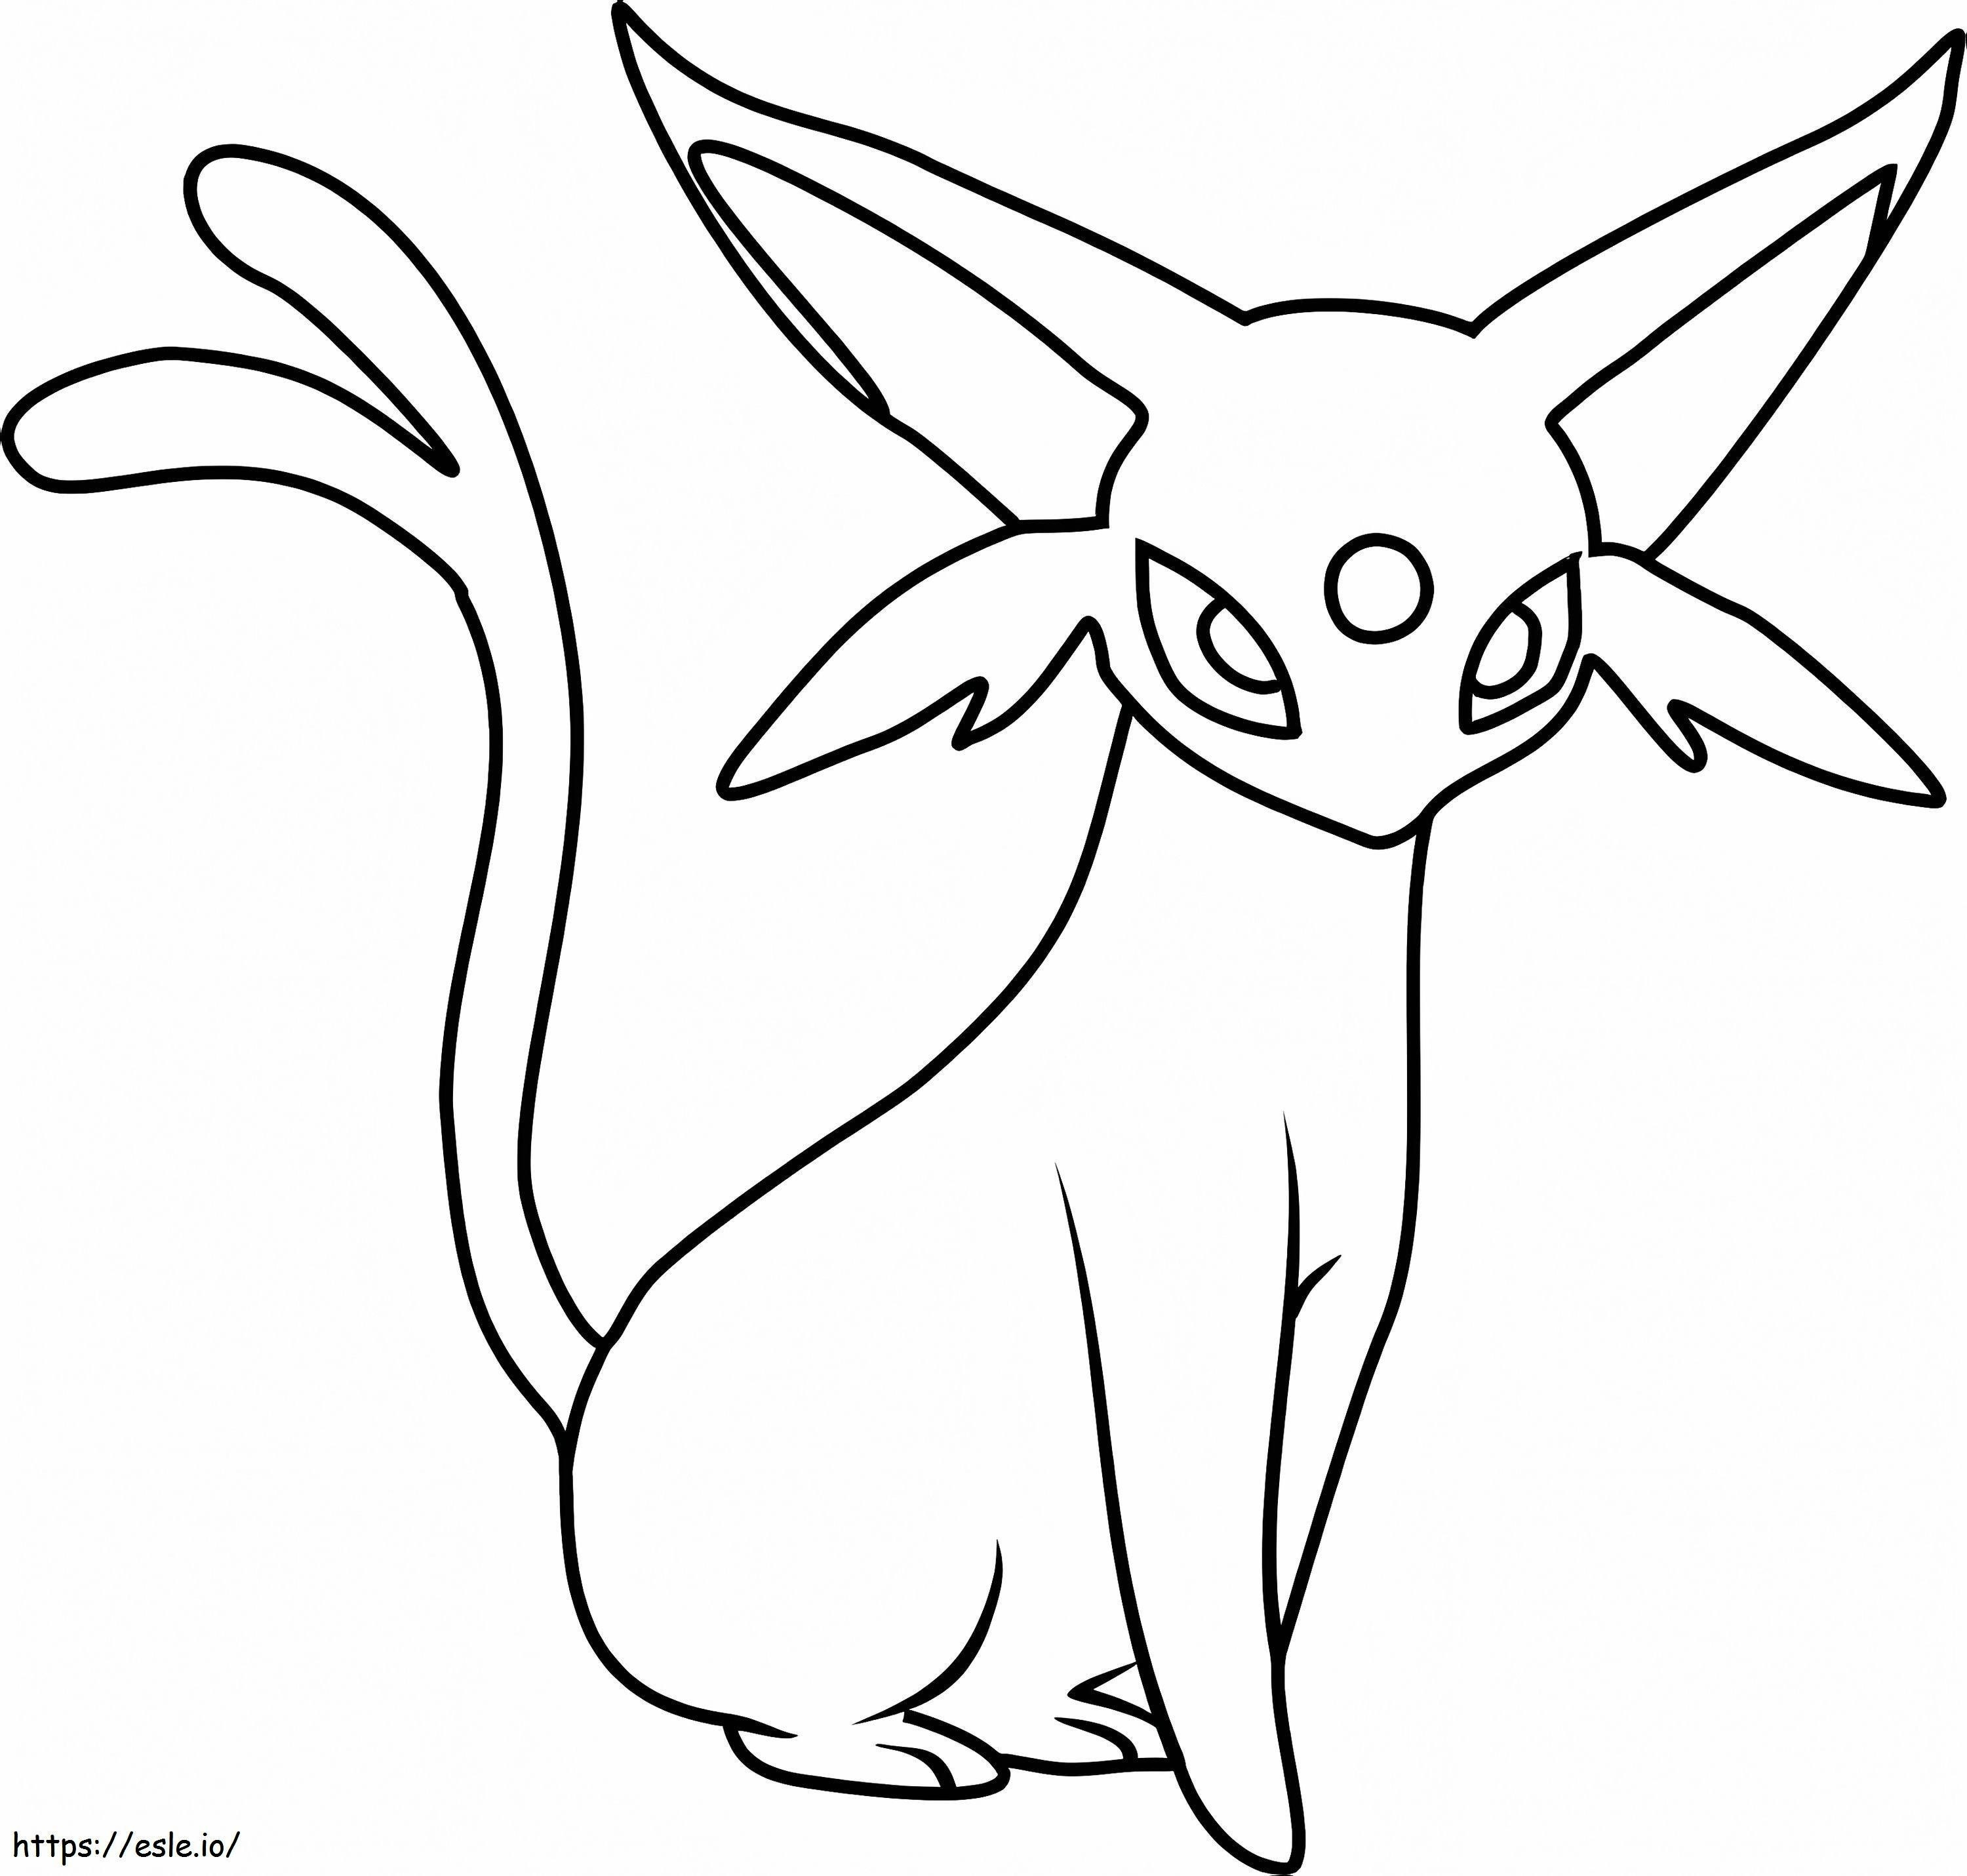 Espeon 2 coloring page